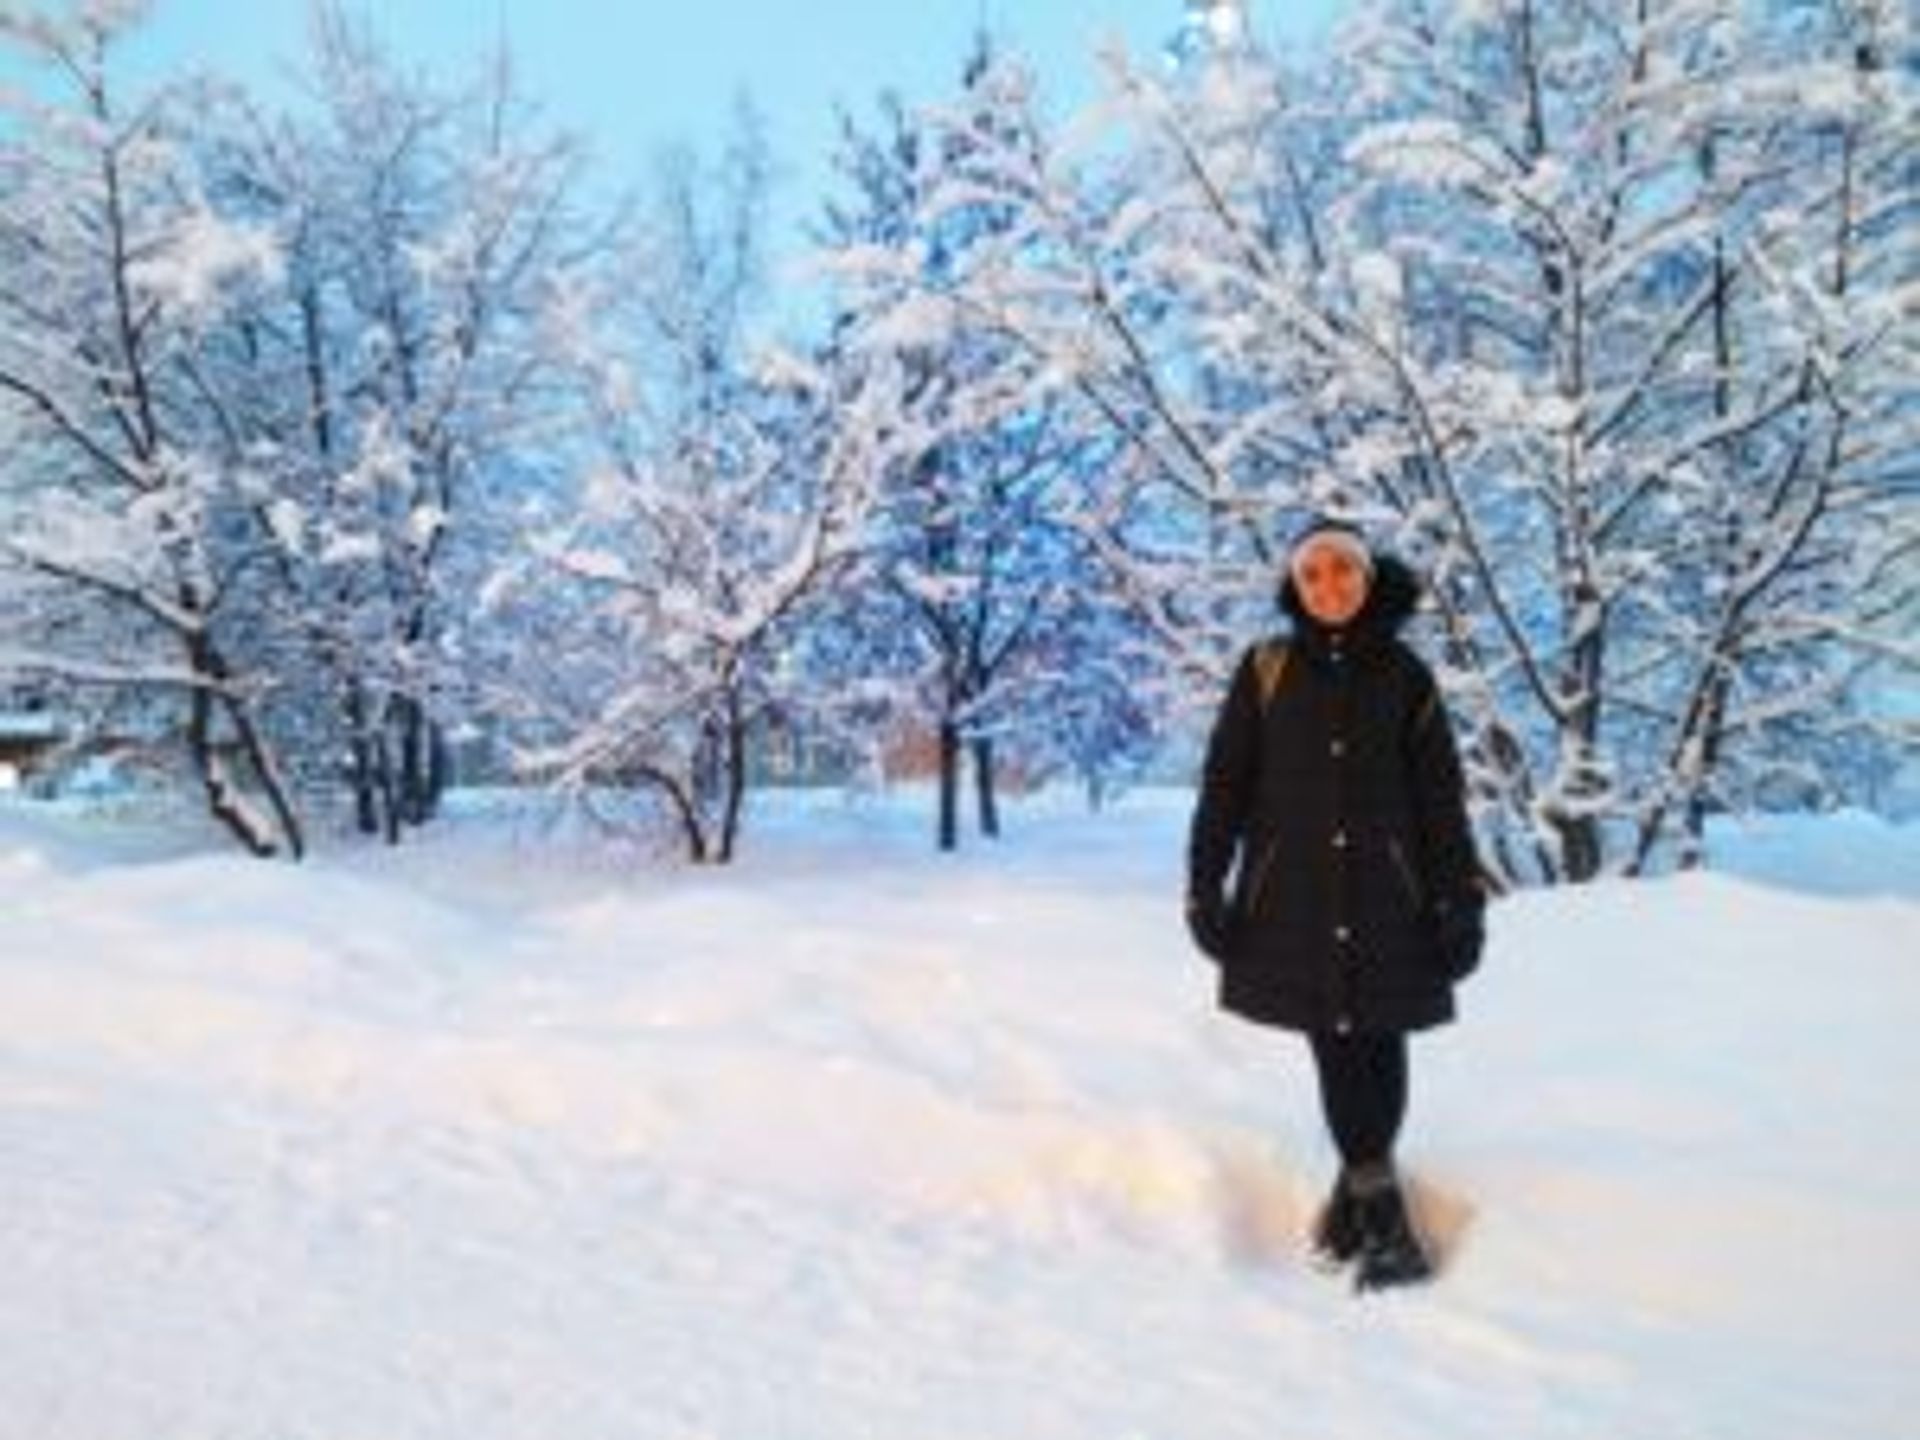 Maria standing in a snowy park.